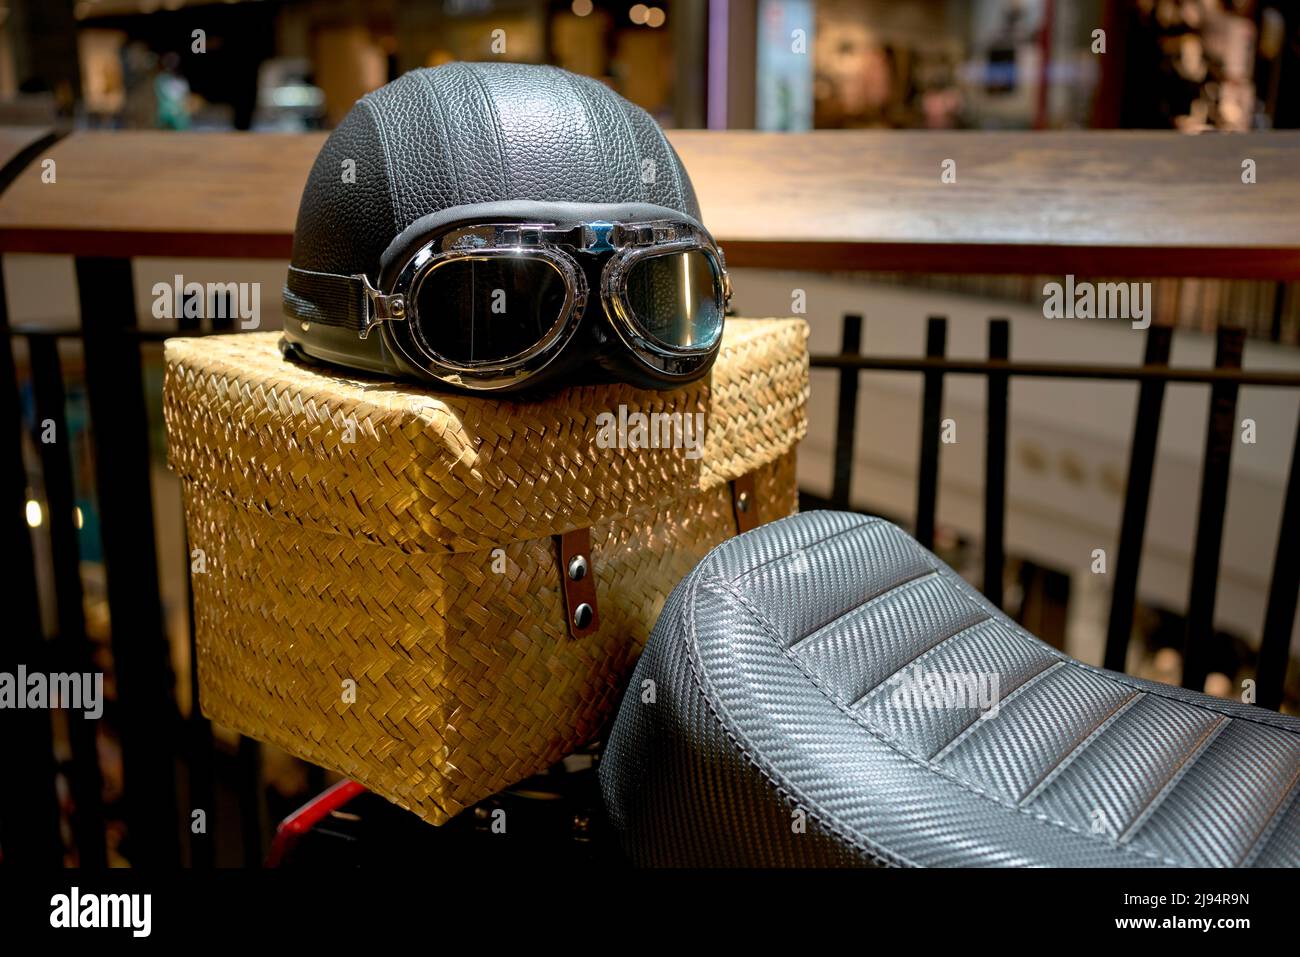 Vintage motorcycle helmet and goggles used as a prop to promote motorbike sales Stock Photo